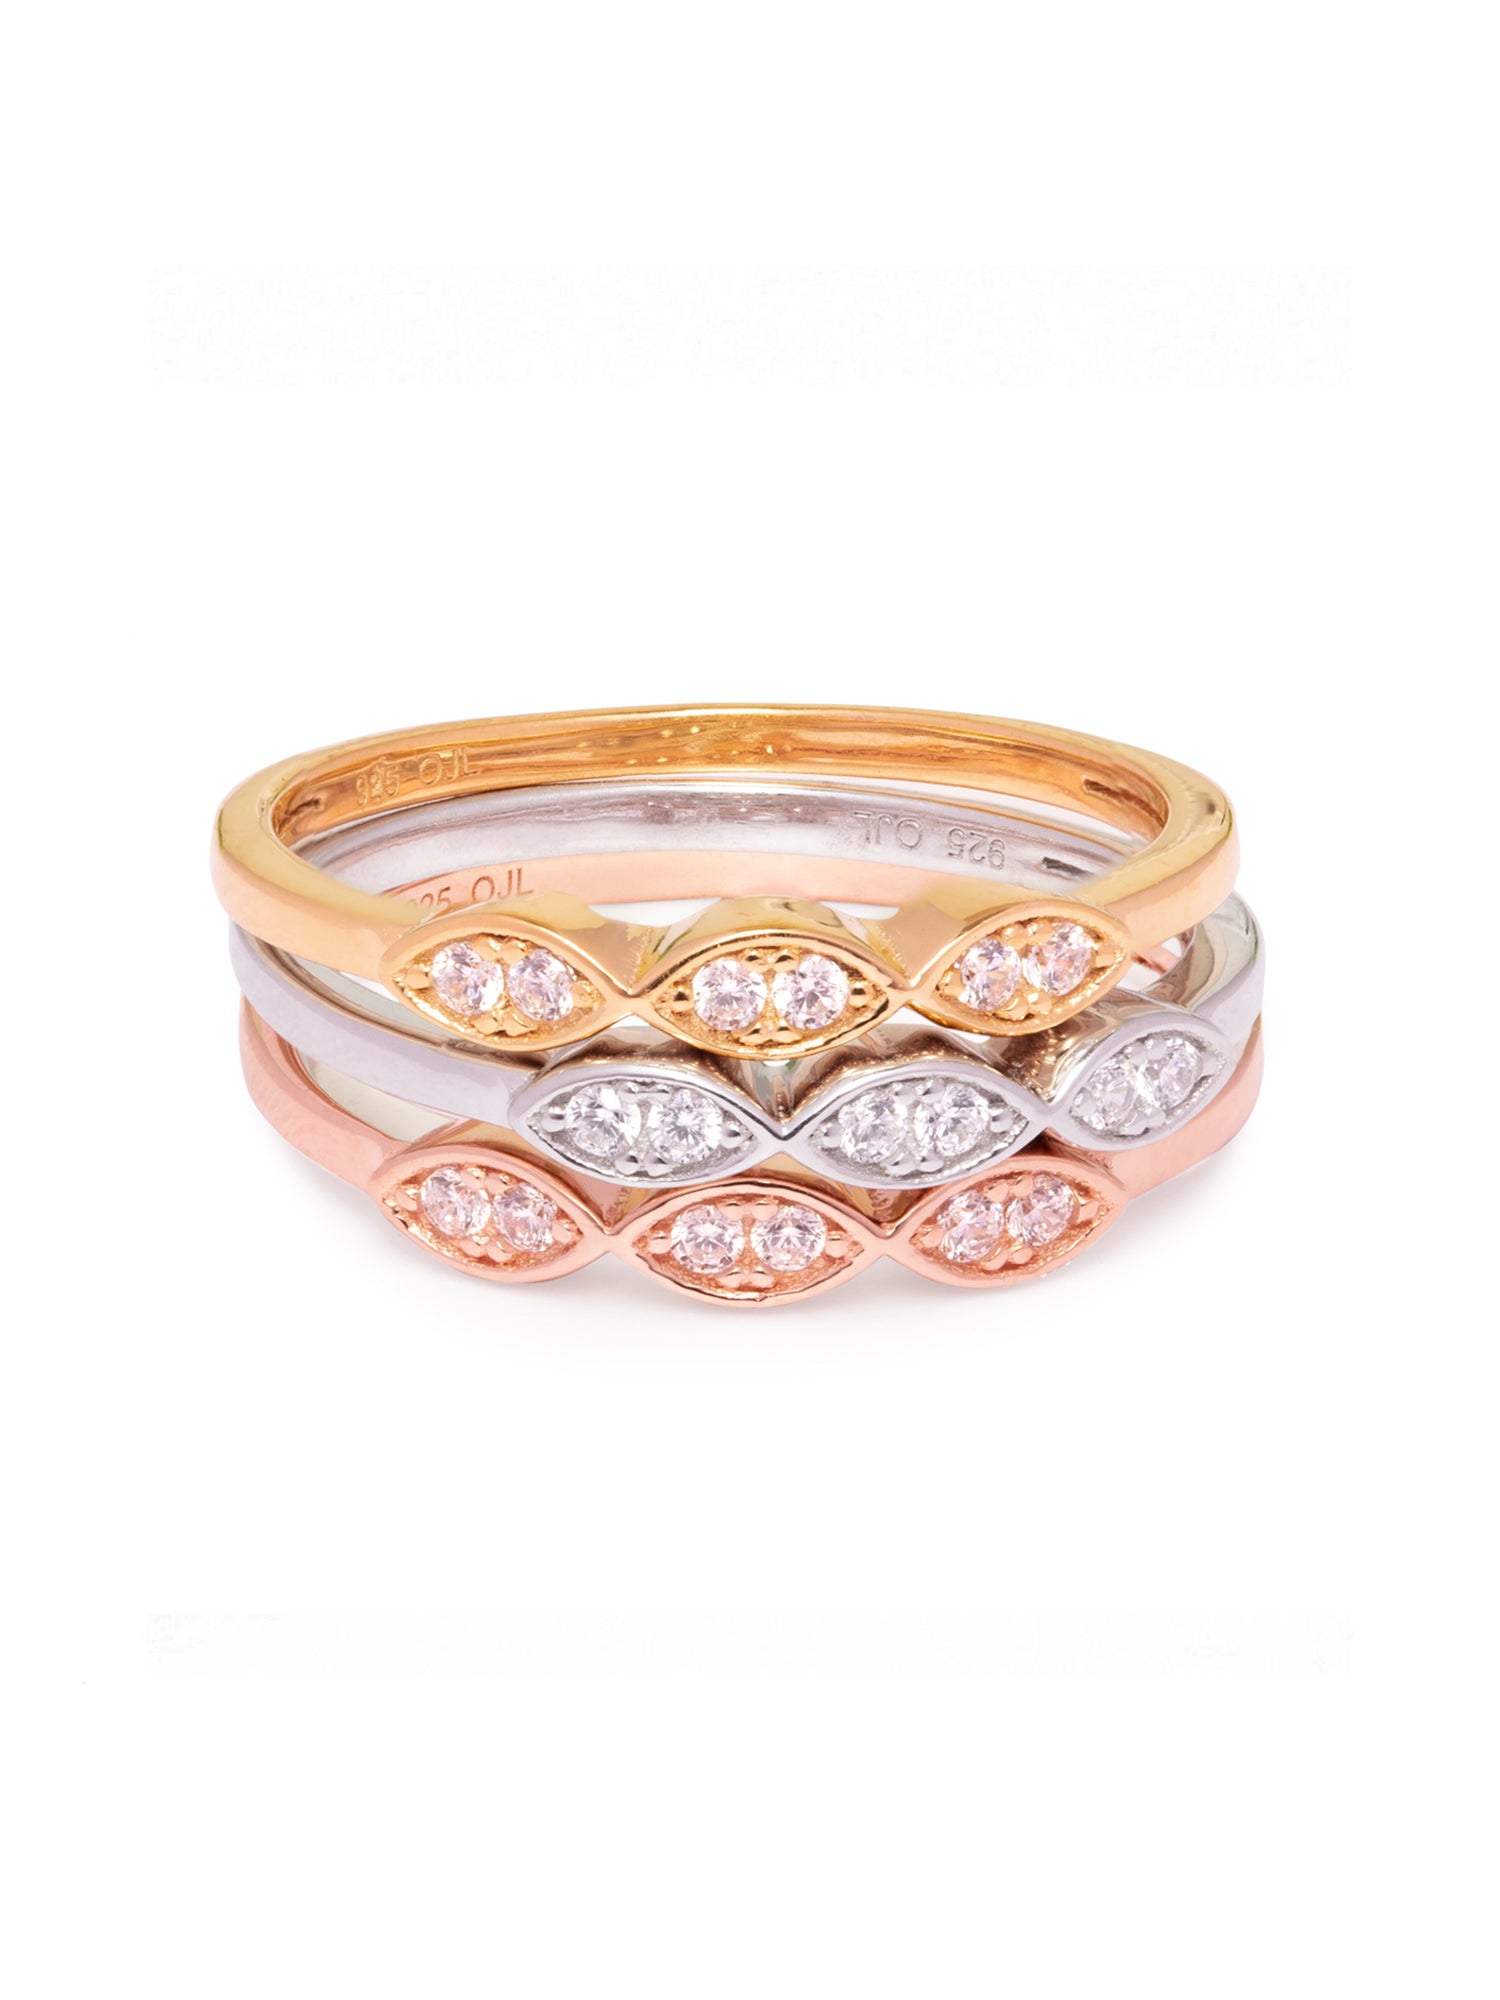 ORNATE JEWELS THREE STONE STACKABLE RING SET-1